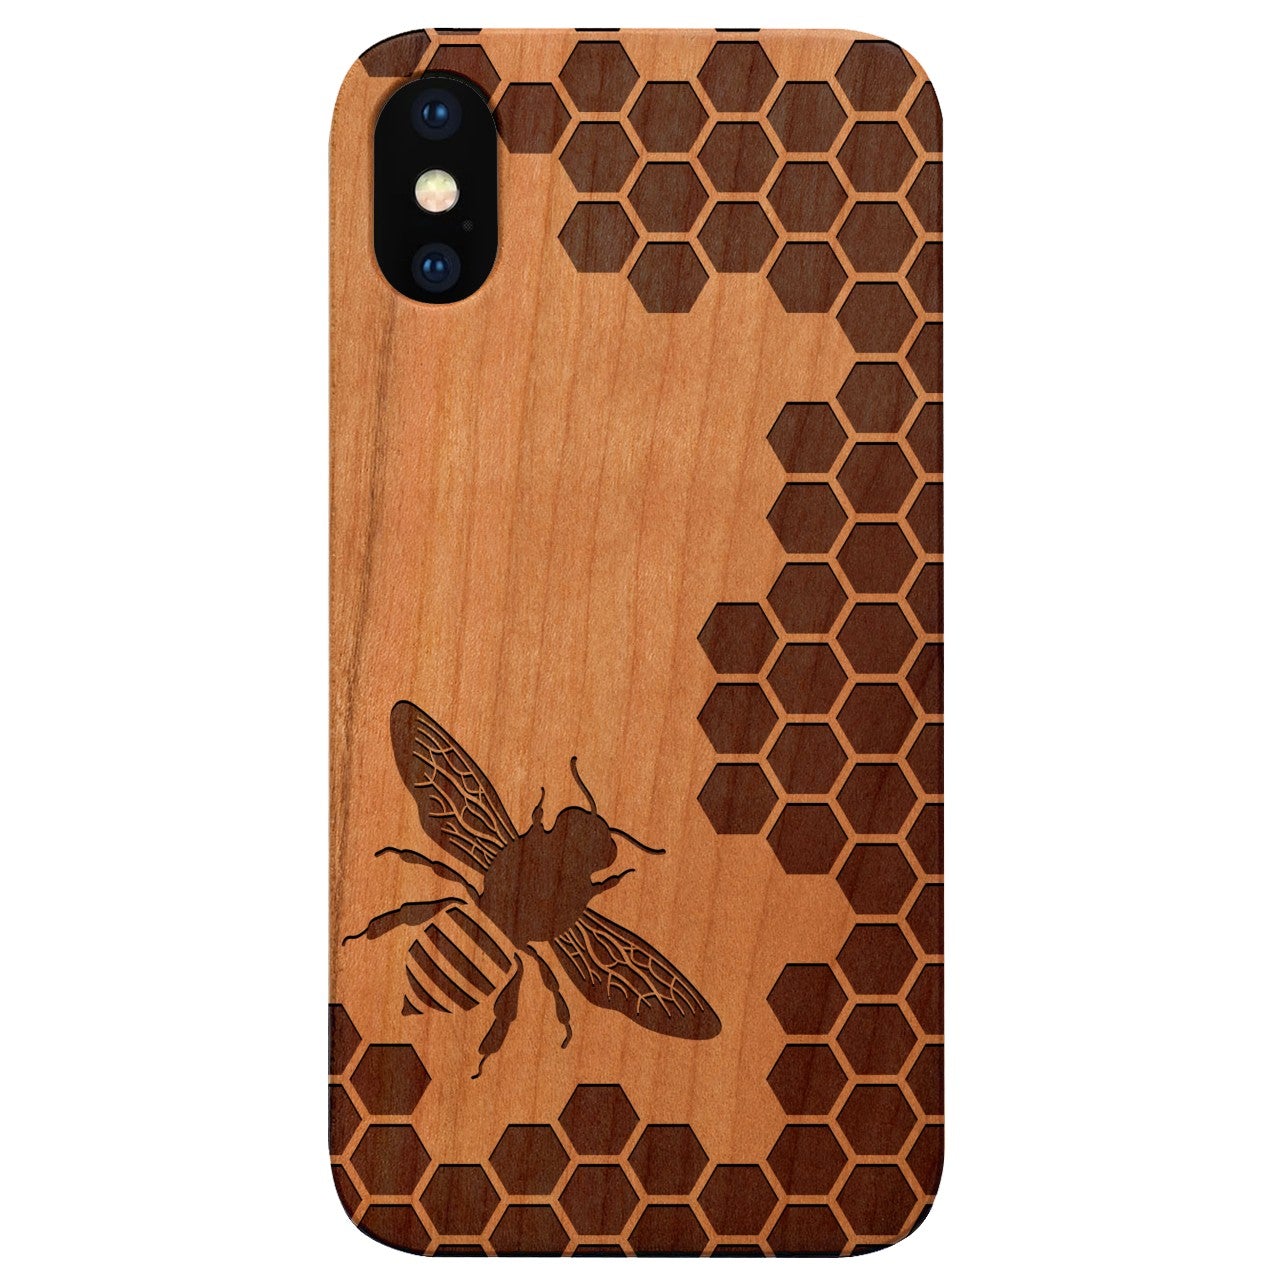  Bee Honeycomb - Engraved - Wooden Phone Case - IPhone 13 Models